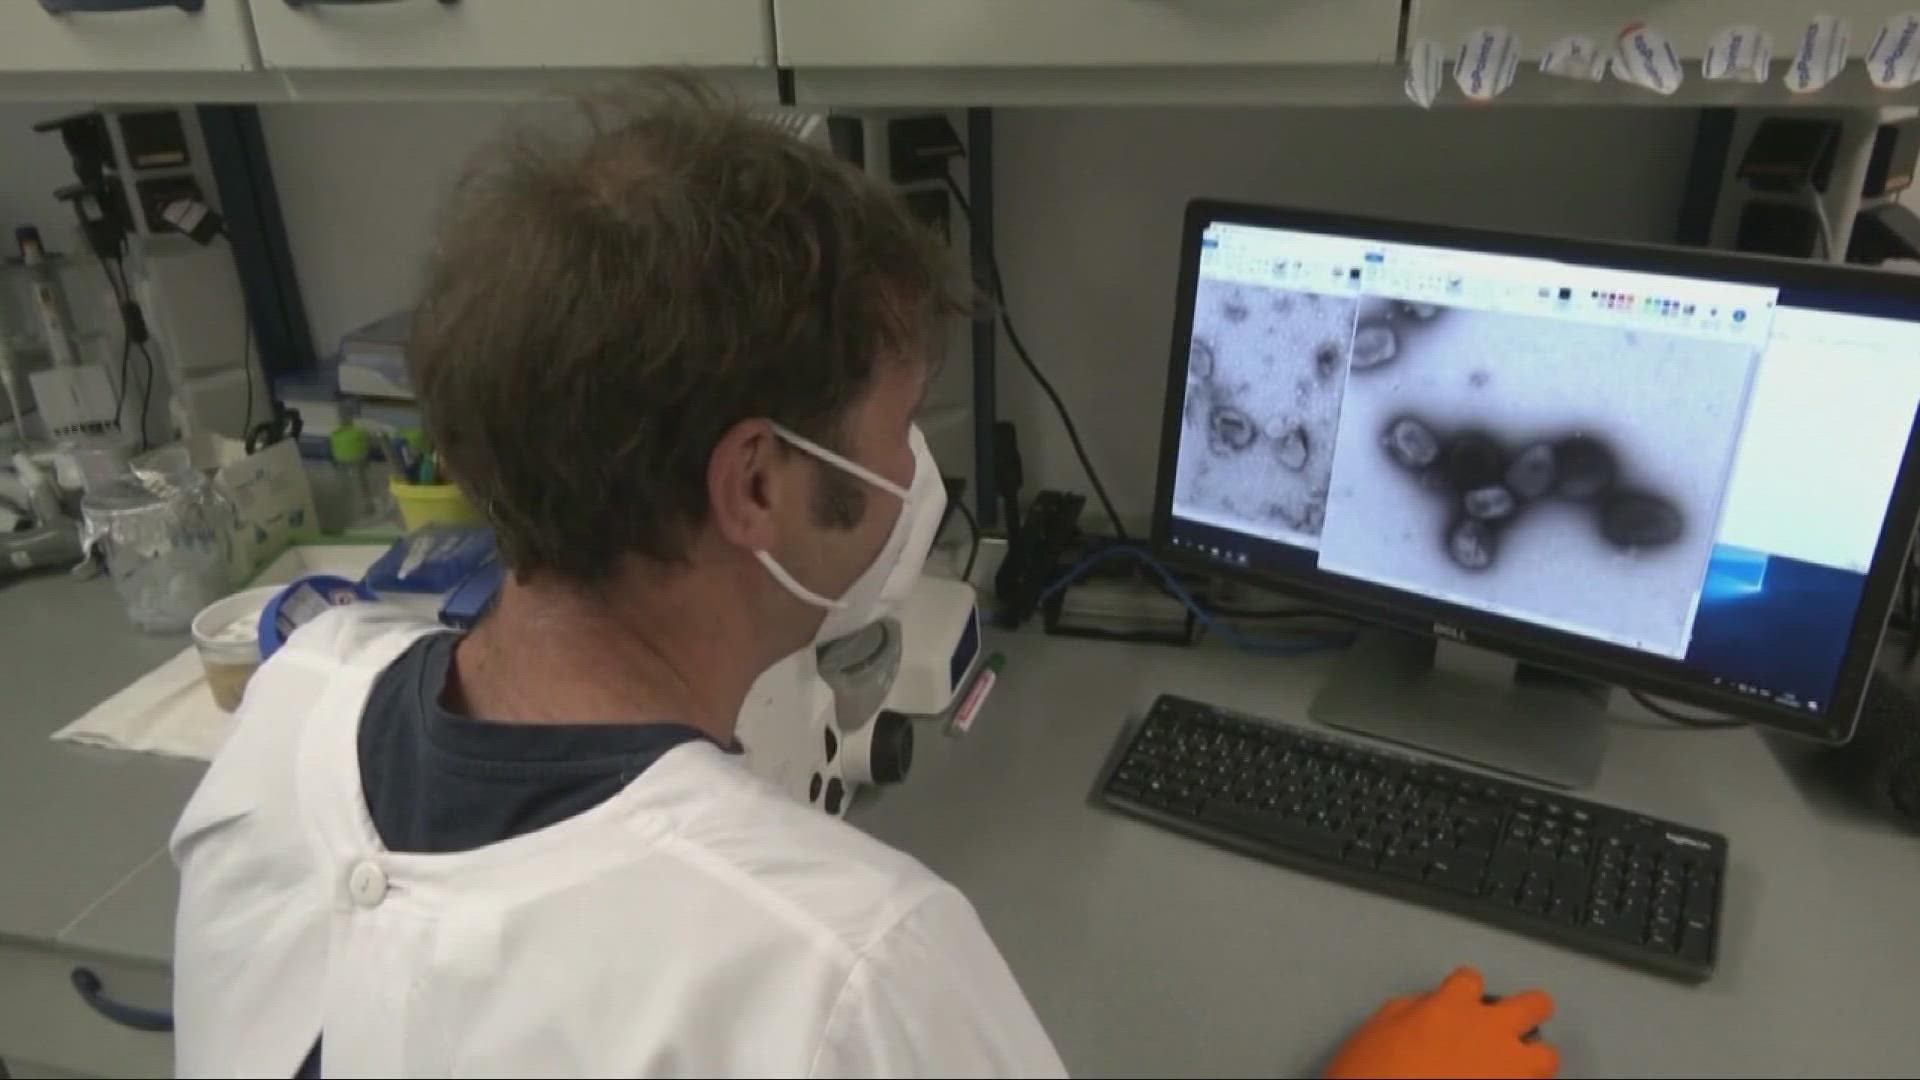 Sacramento County health officials have identified a total of 10 possible cases of monkeypox in the county since May.